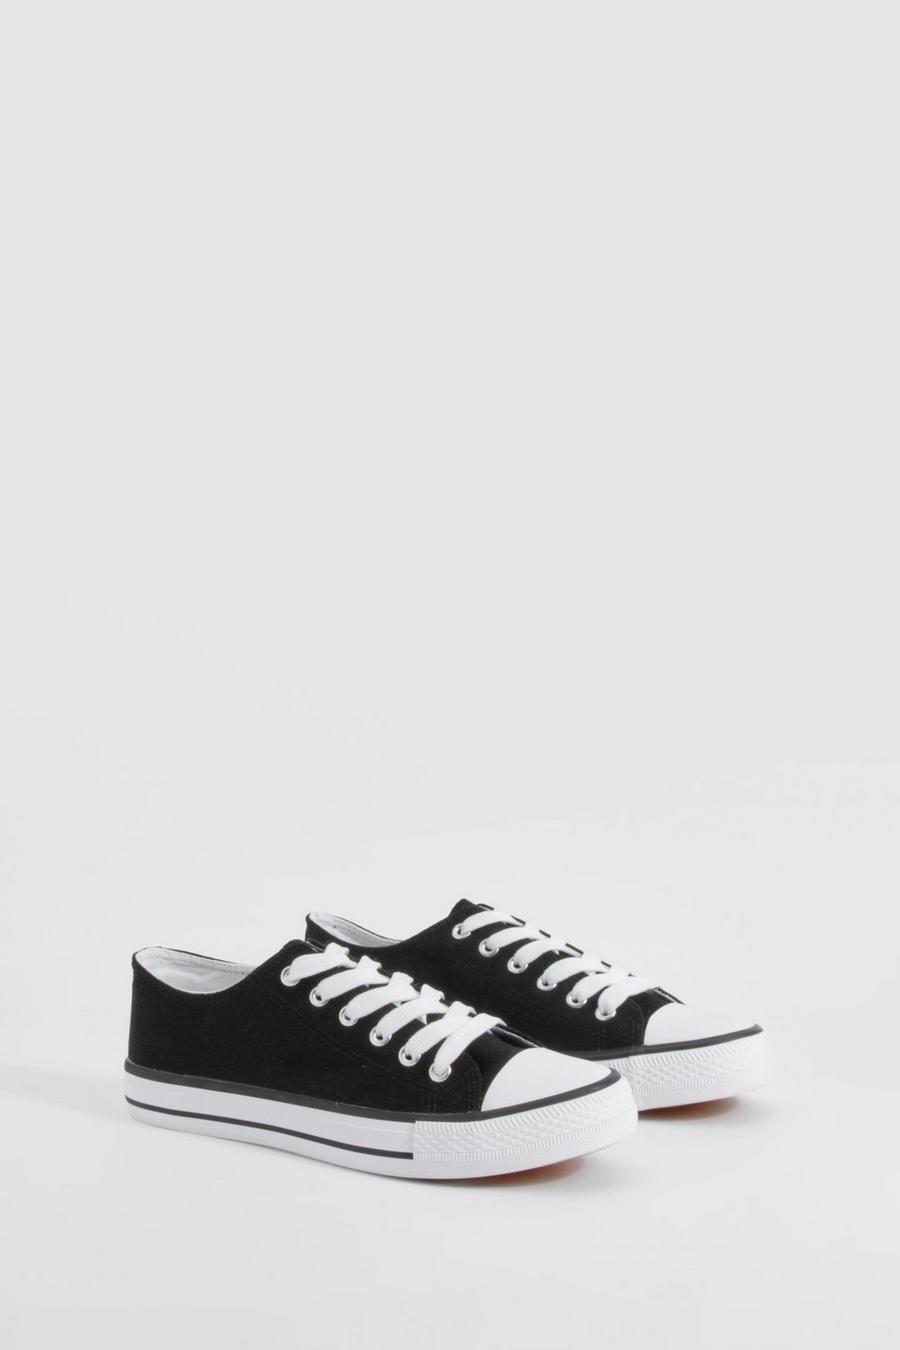 Black_white Low Top Lace Up Trainers 